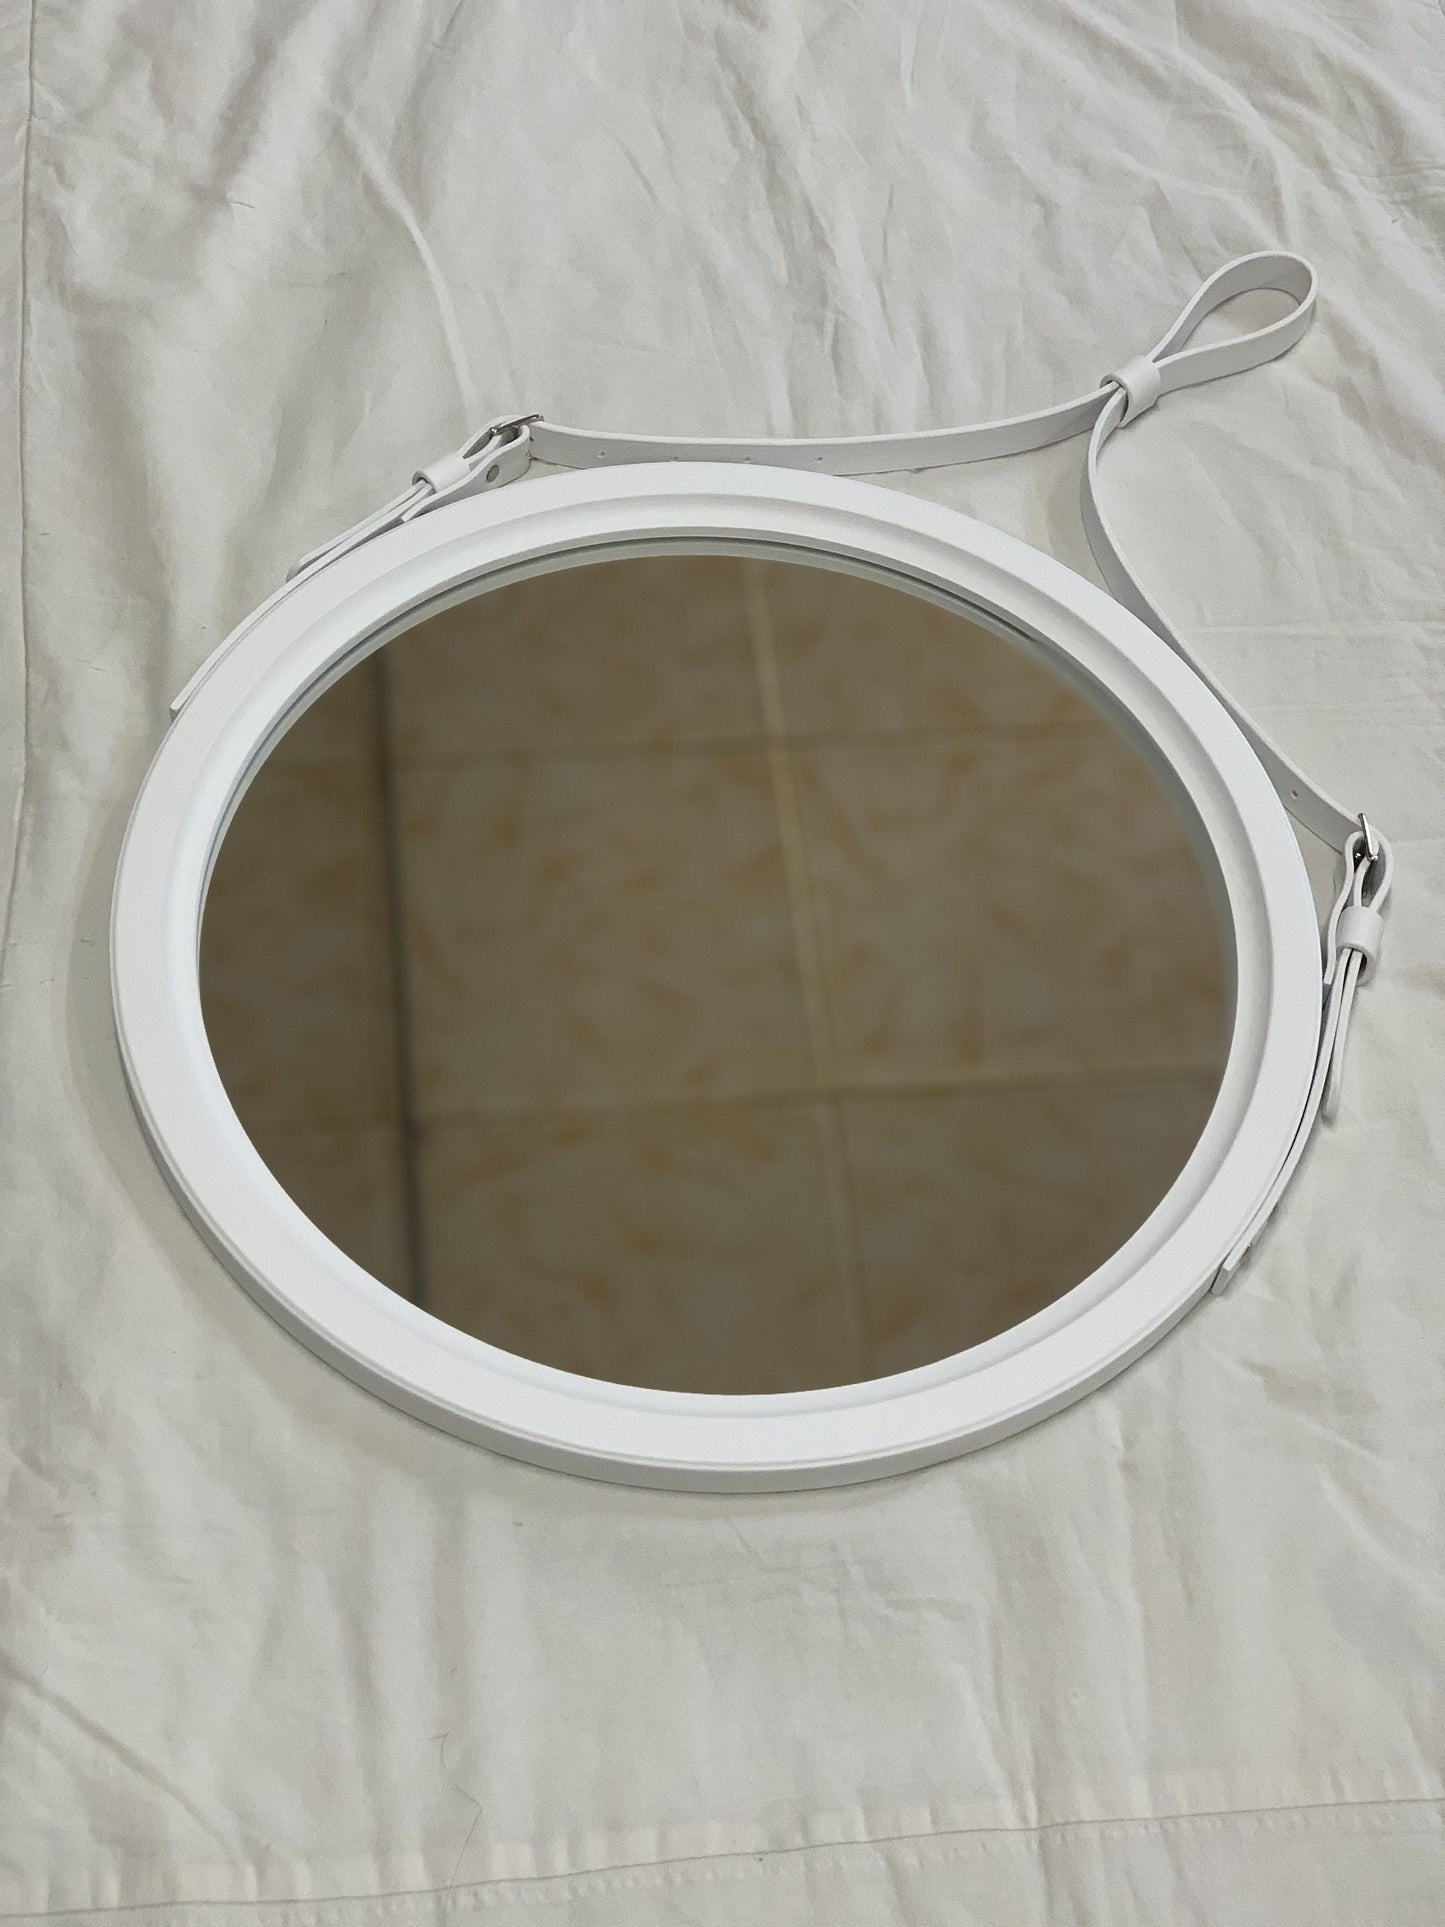 White round mirror on leather strap for living room Modern mirror for bathroom, Wooden frame mirror for wall White Leather mirror for Vanity